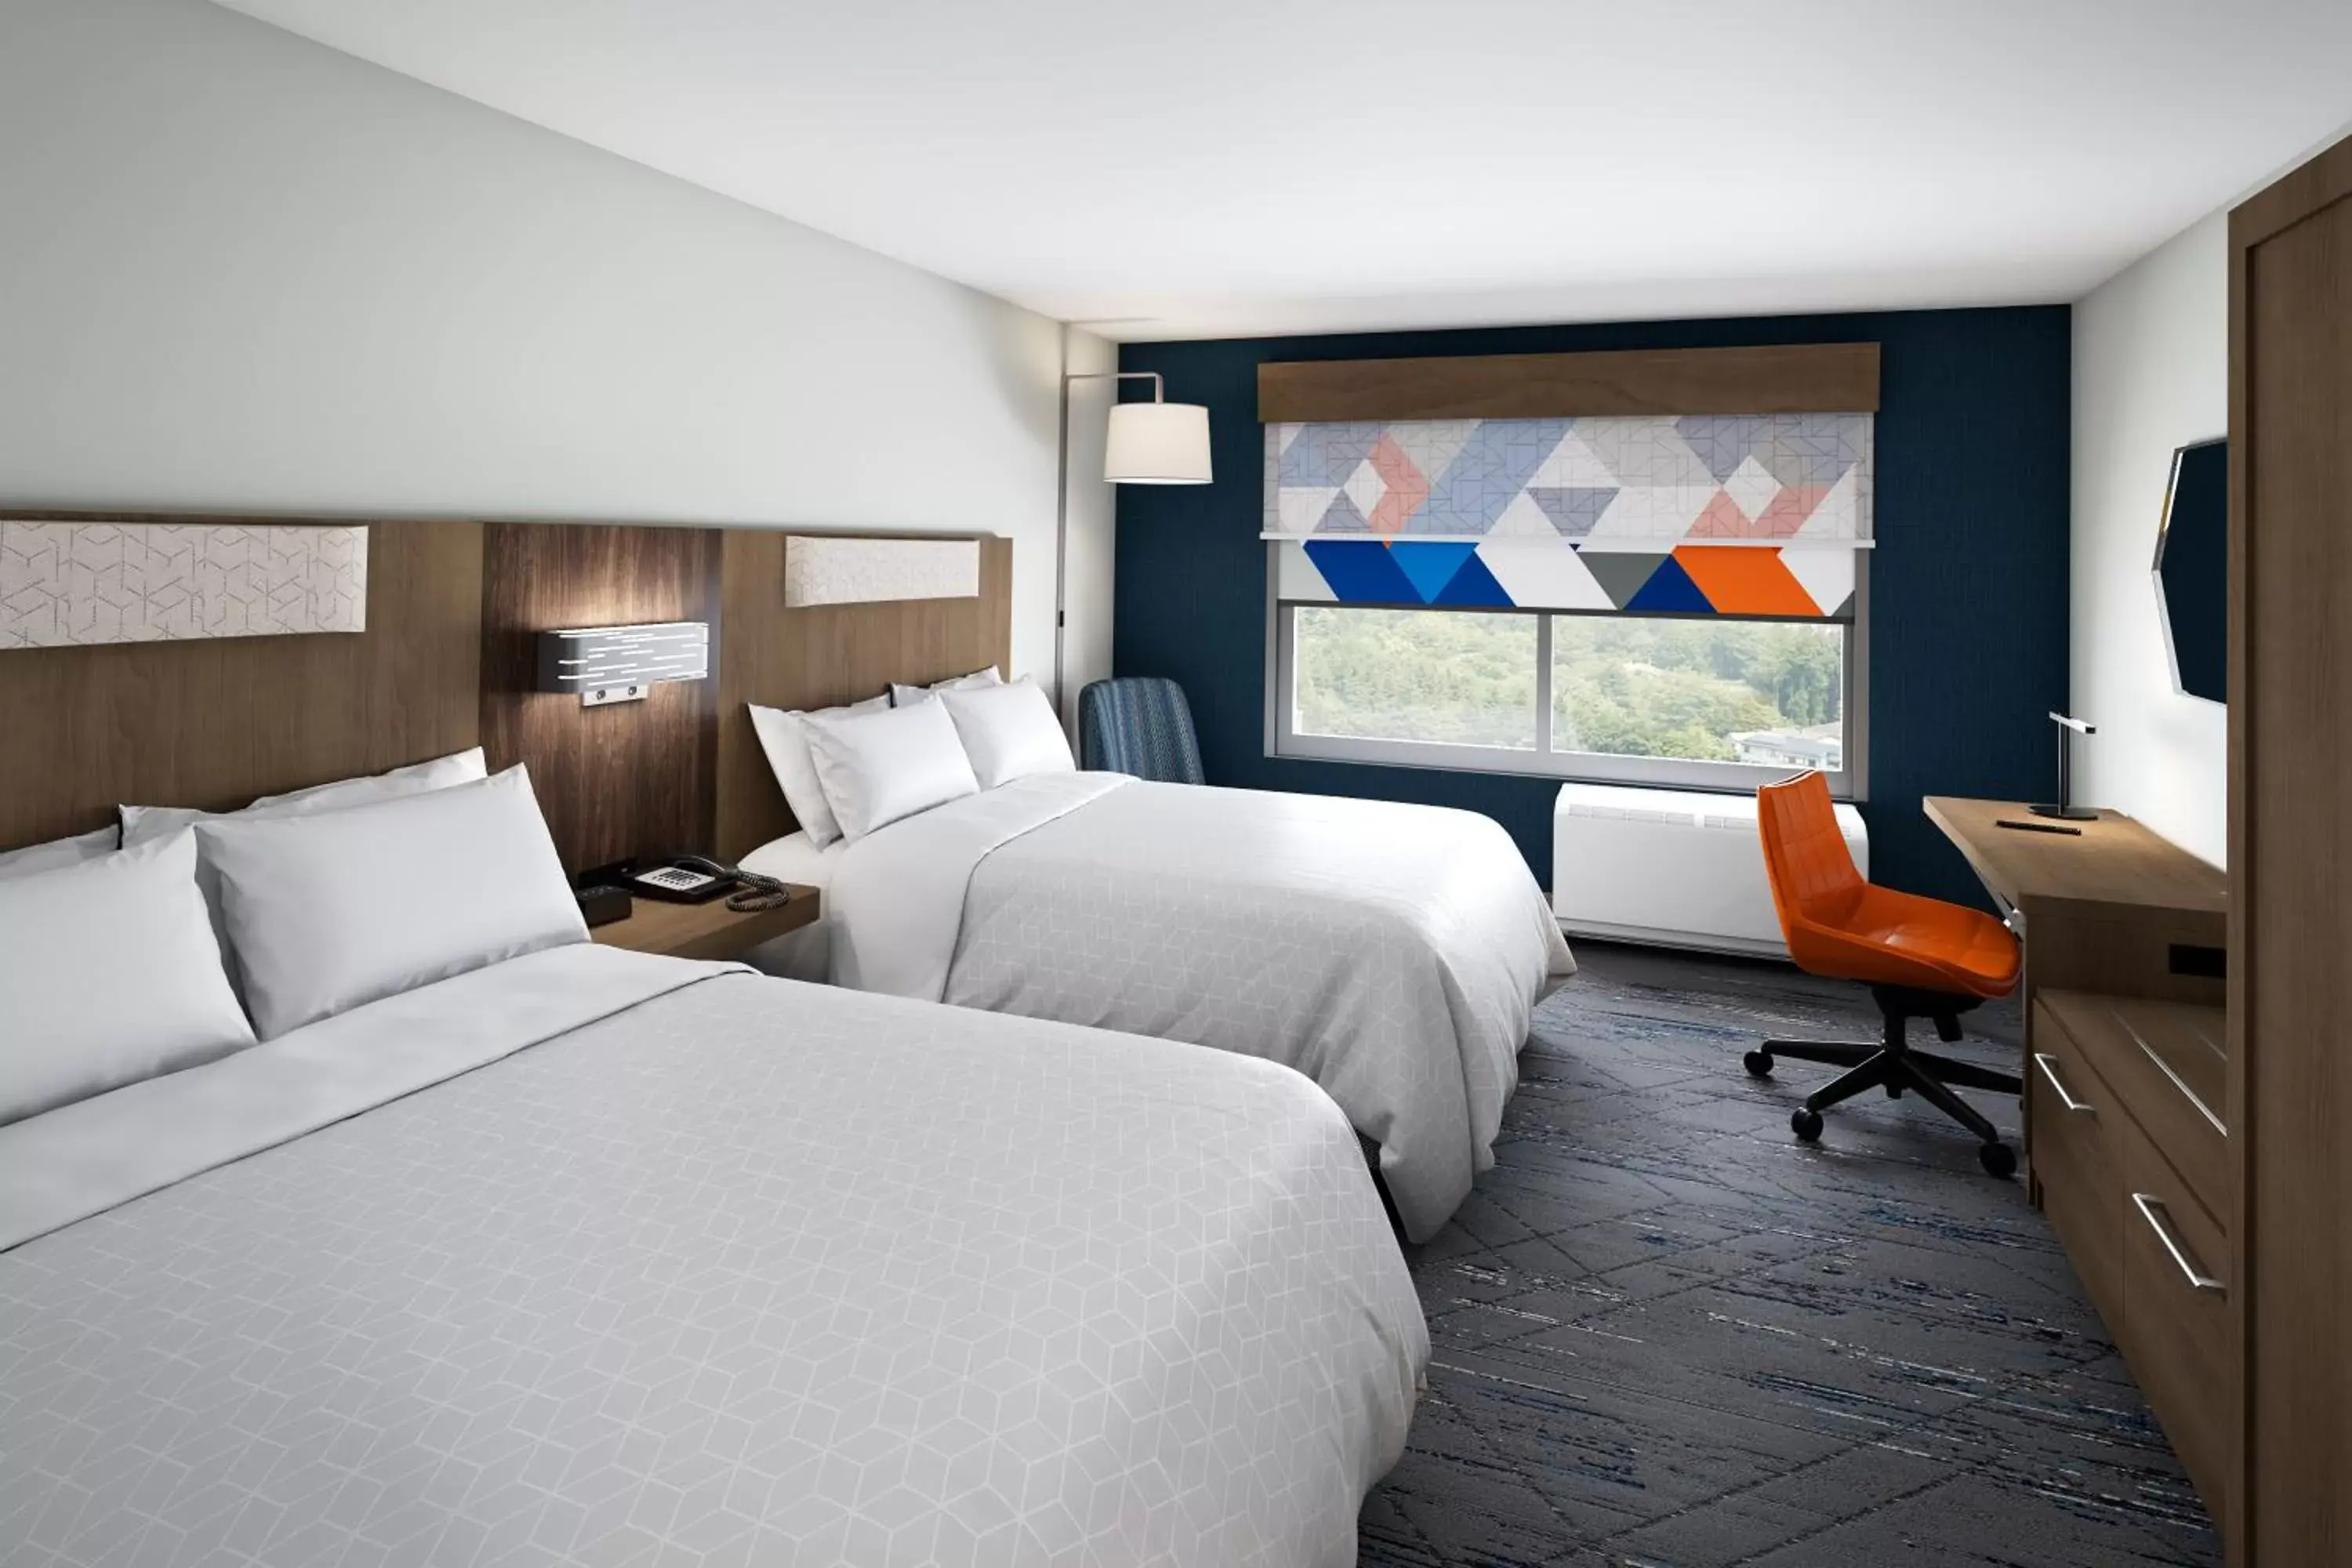 Holiday Inn Express & Suites Central Omaha, an IHG Hotel